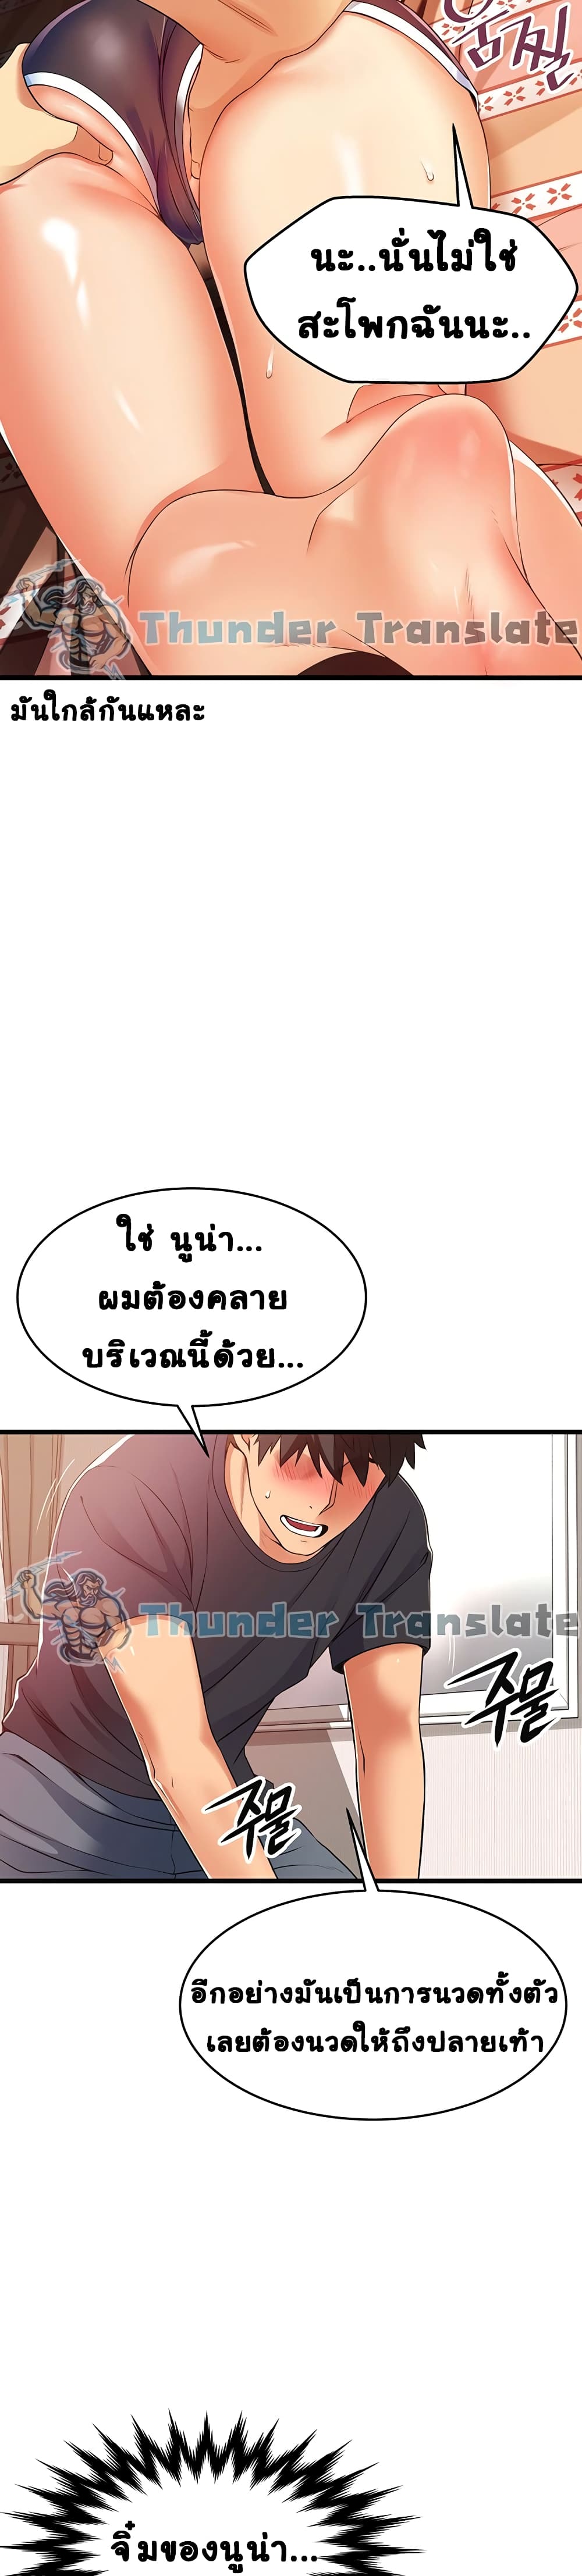 An Alley story ตอนที่ 3 (33)